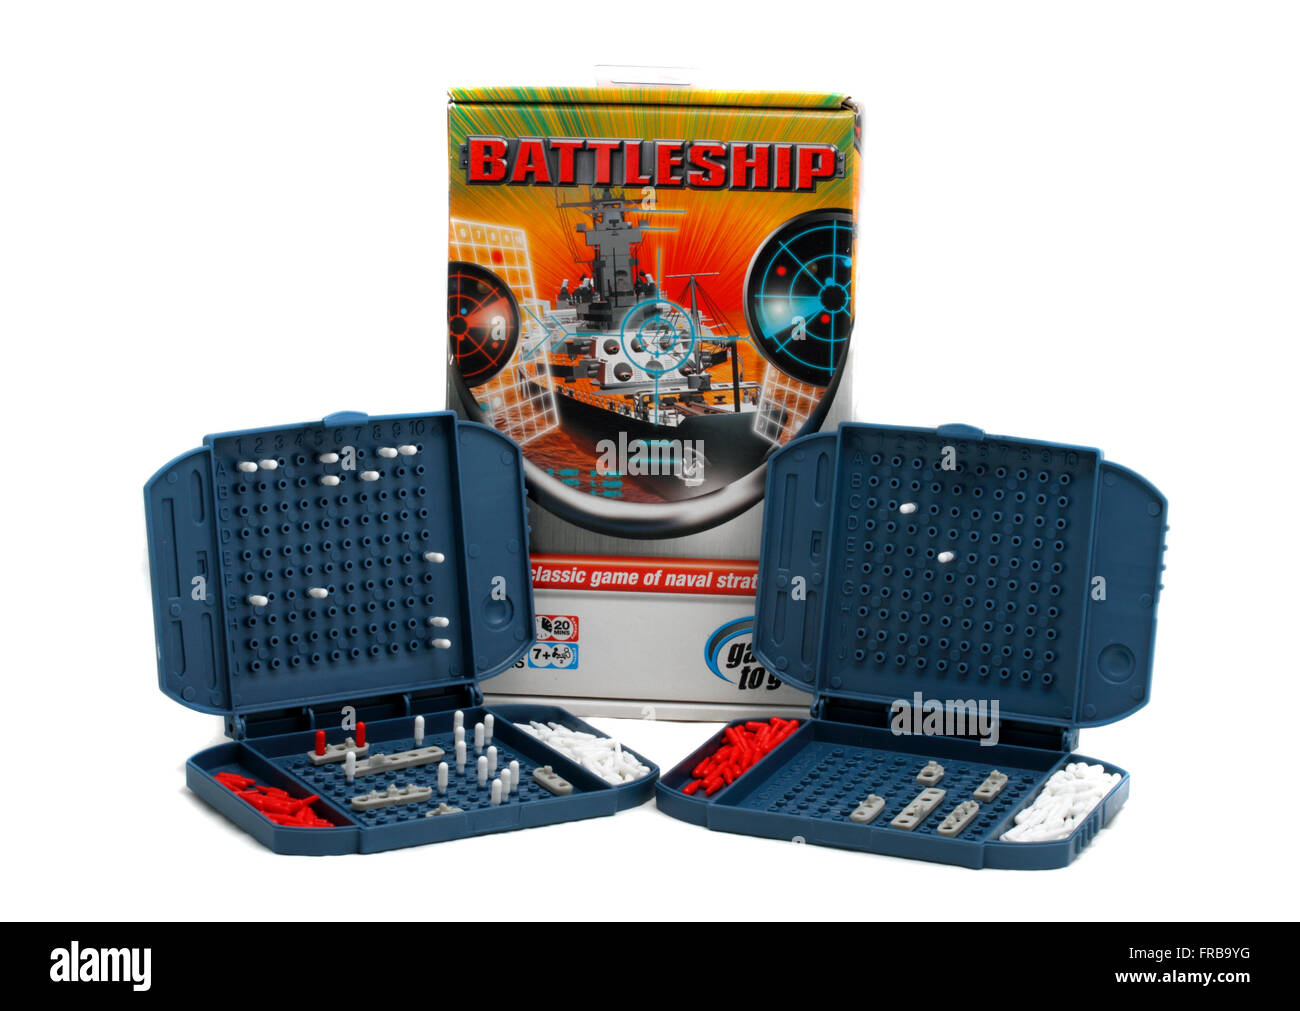 battleships - the classic game of naval strategy - no batteries required Stock Photo